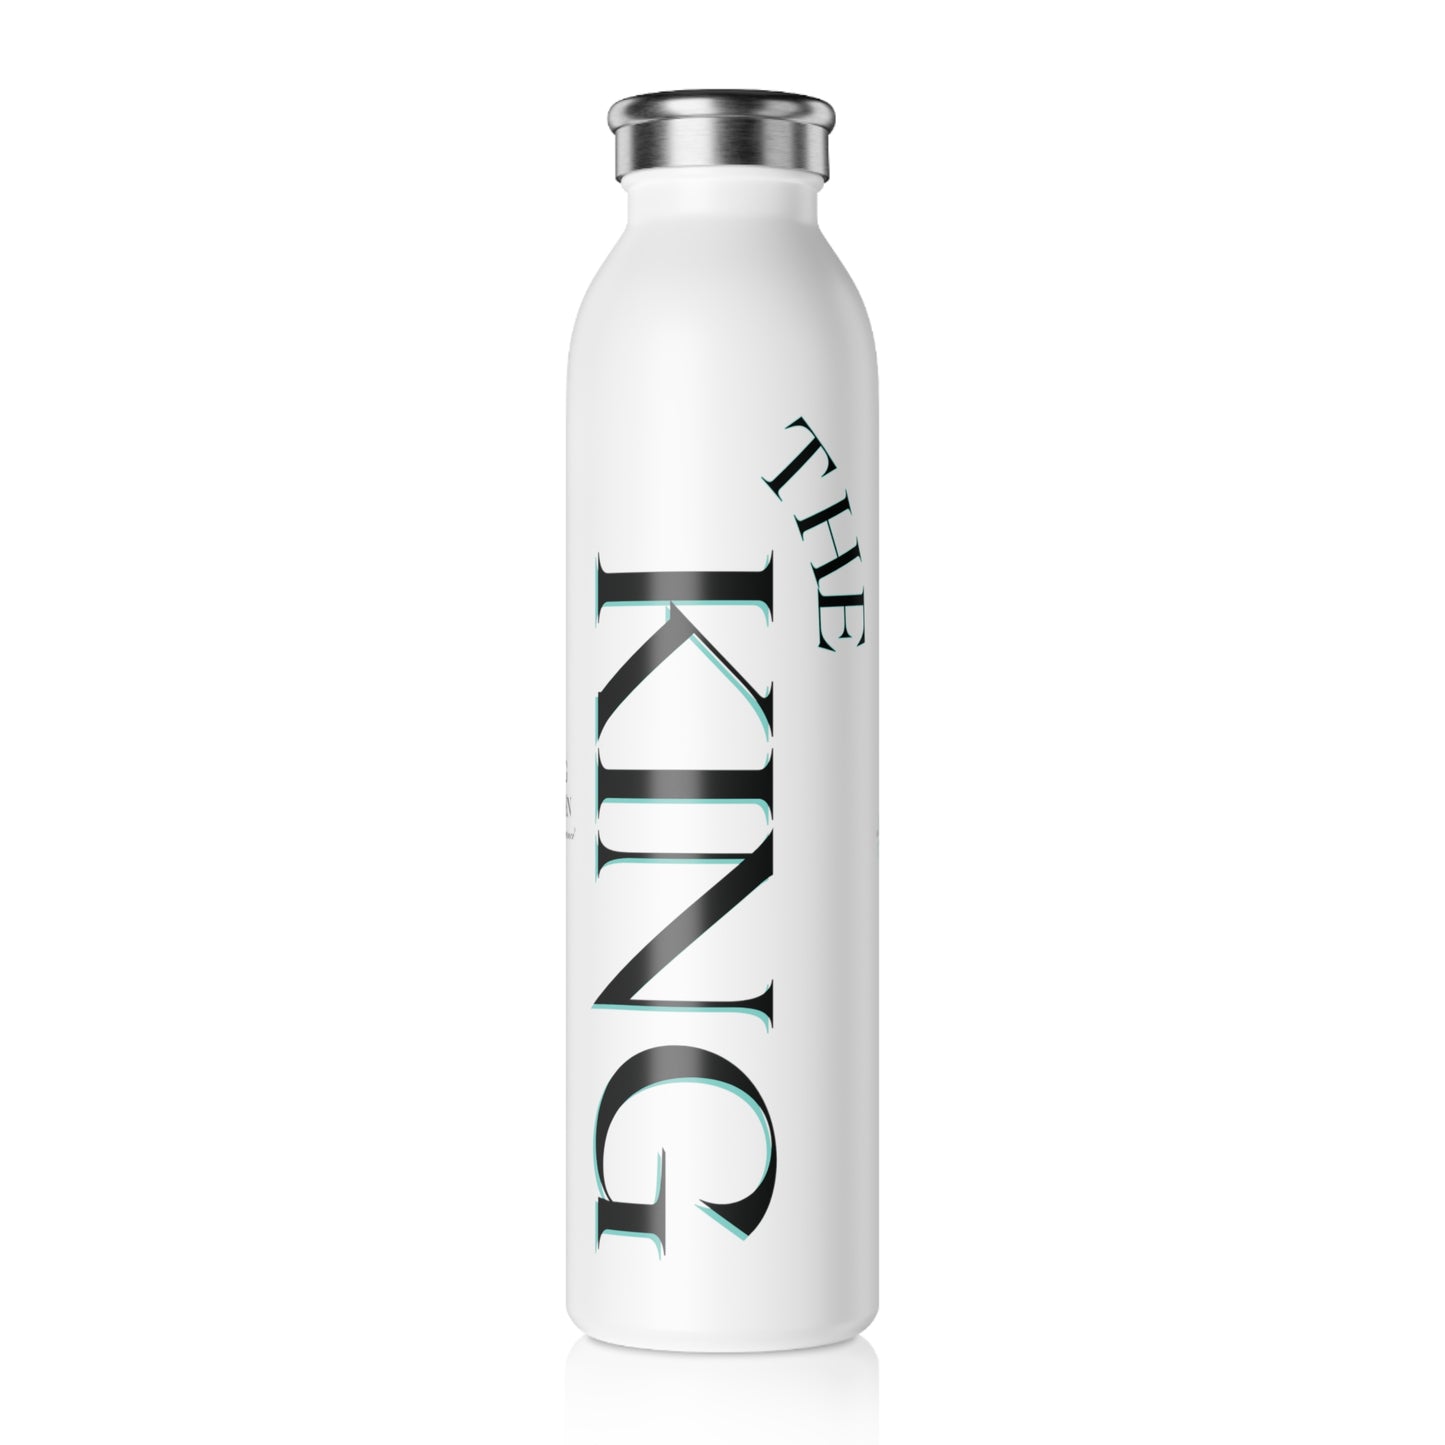 "The King" Water Bottle